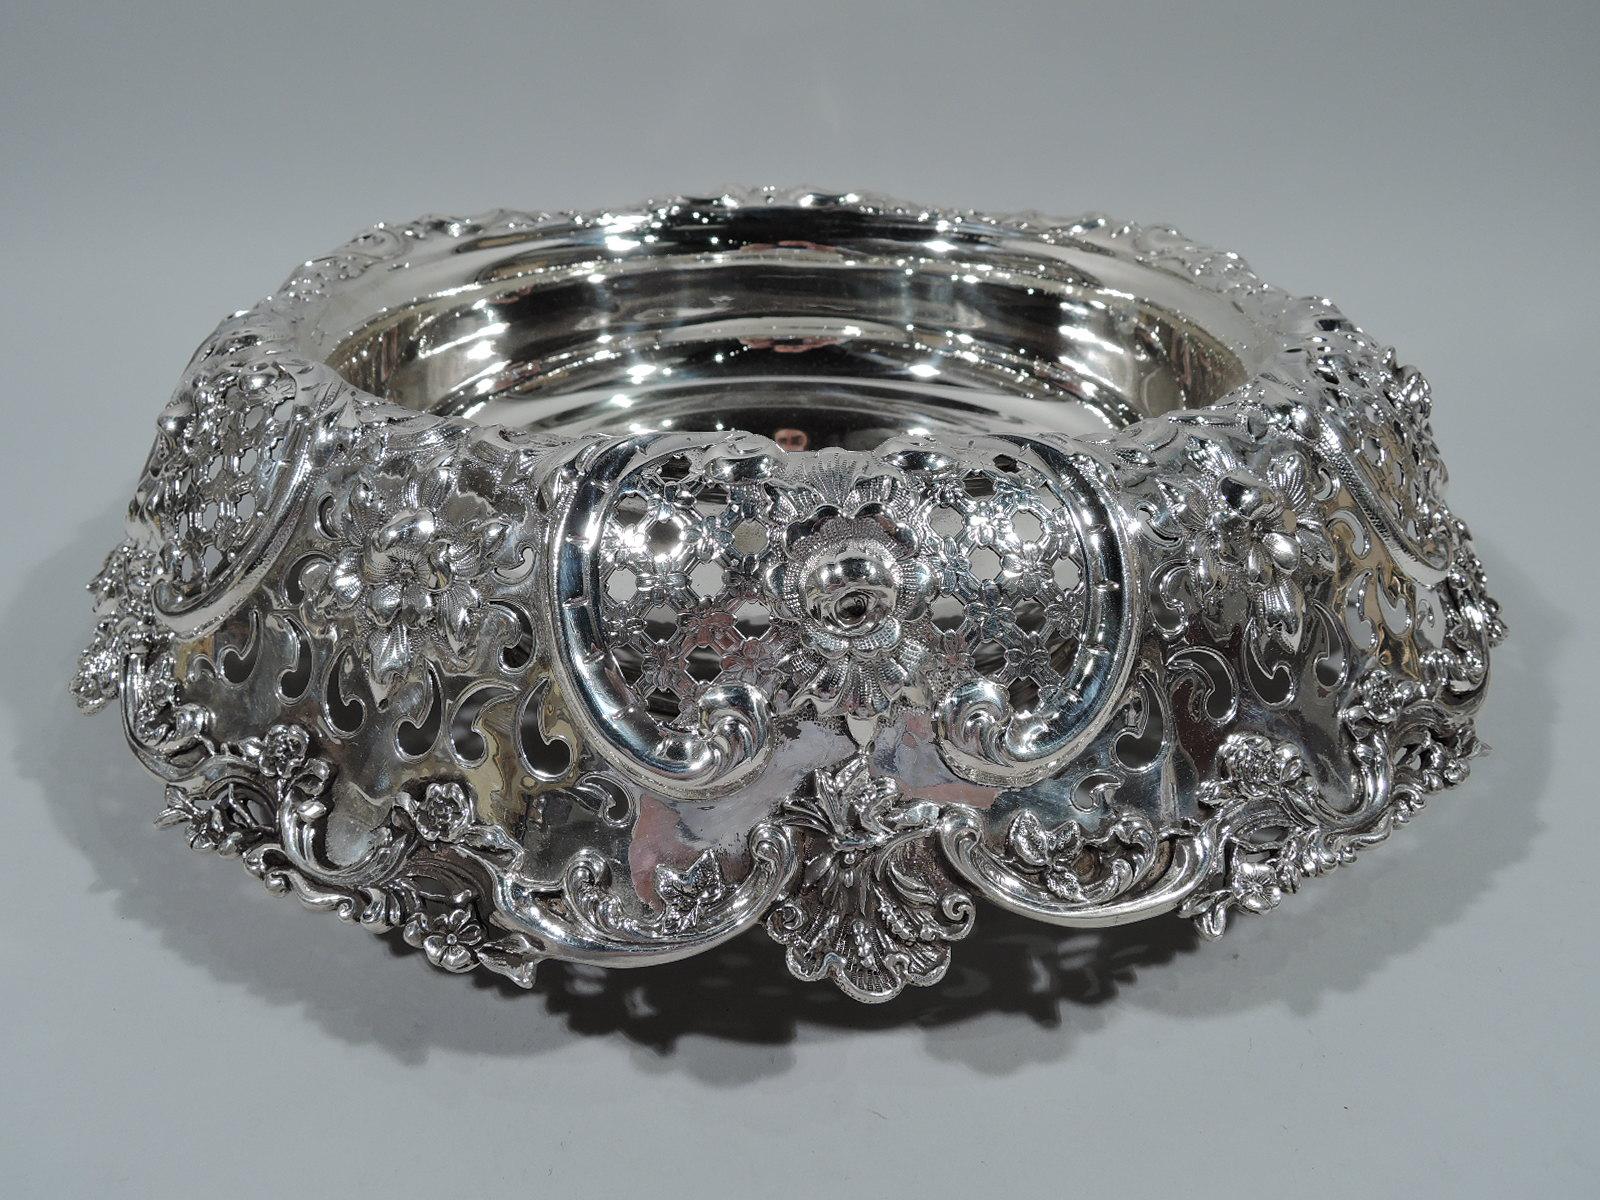 Large and fancy sterling silver centrepiece bowl. Made by Tiffany & Co. in New York, circa 1910. Solid round well. Wide turned-down rim with pierced, chased, and applied ornament, including flowers, diaper, scallop shells, and scrolls. The works.